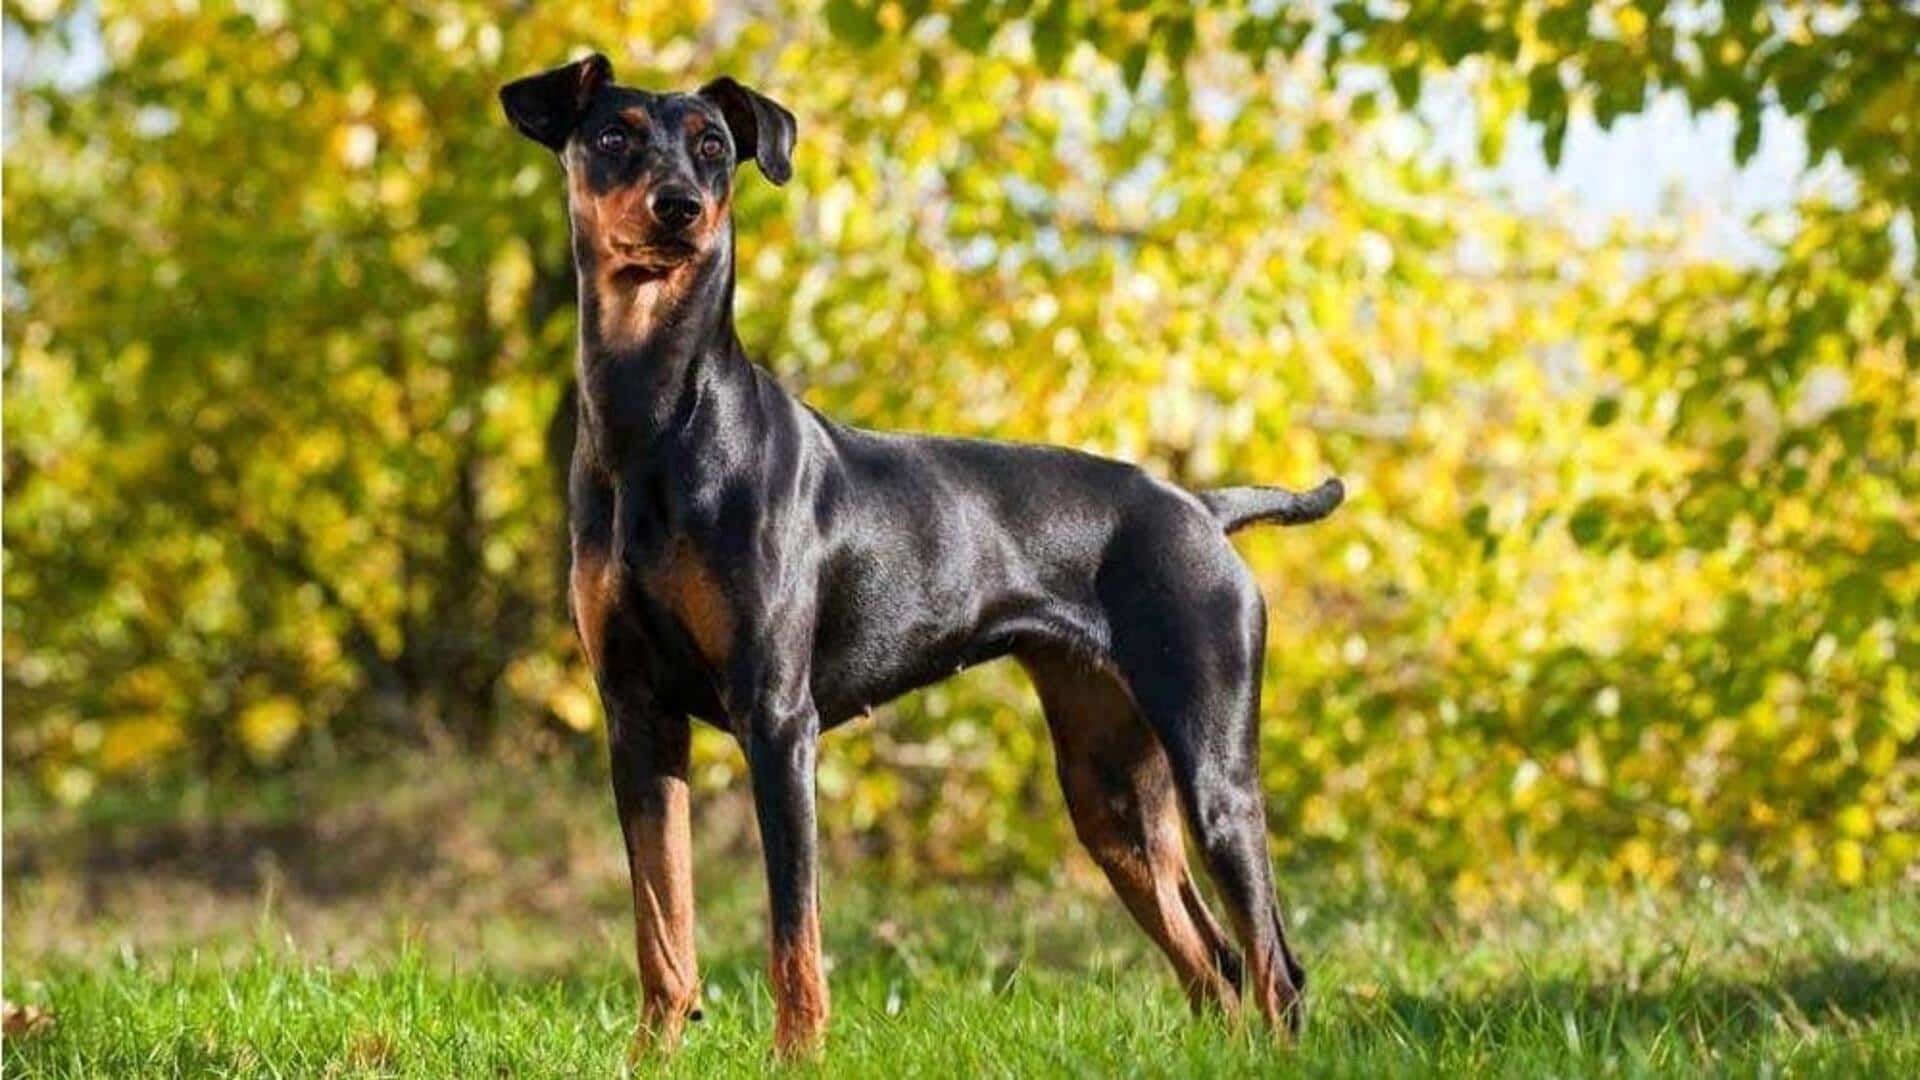 German Pinscher care tips: Food, training, grooming, and socialization